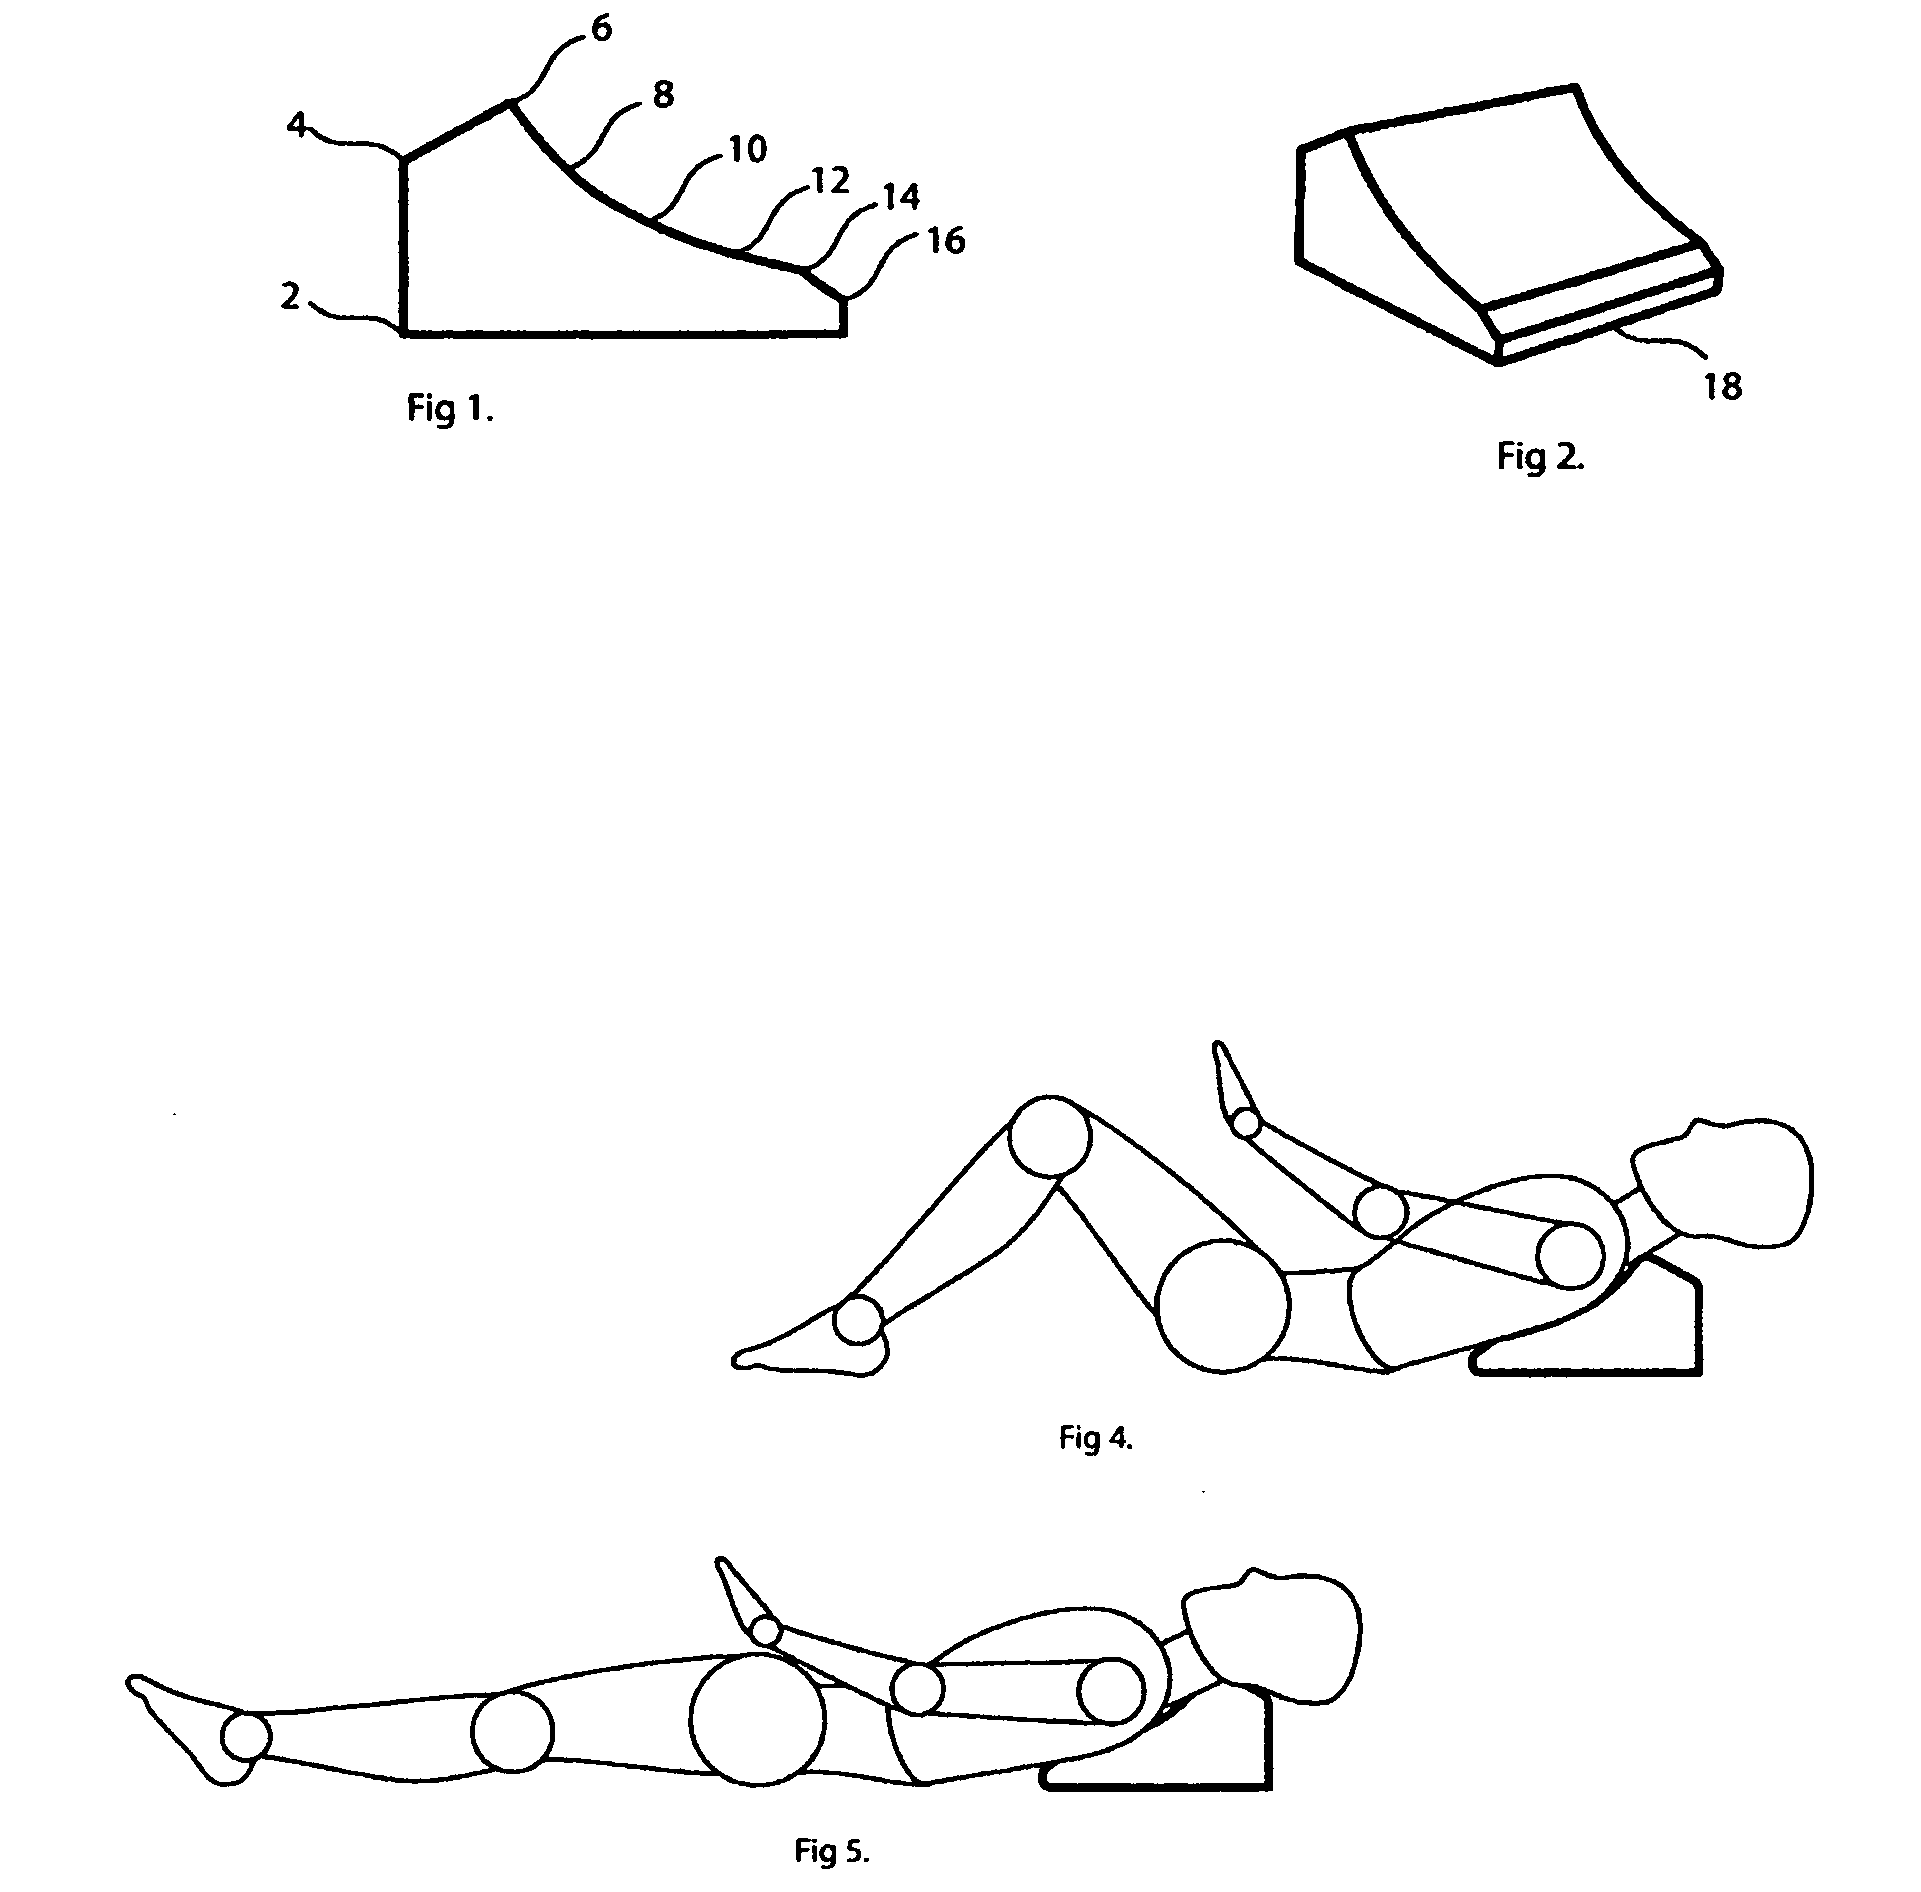 Body support system for a variety of purposes